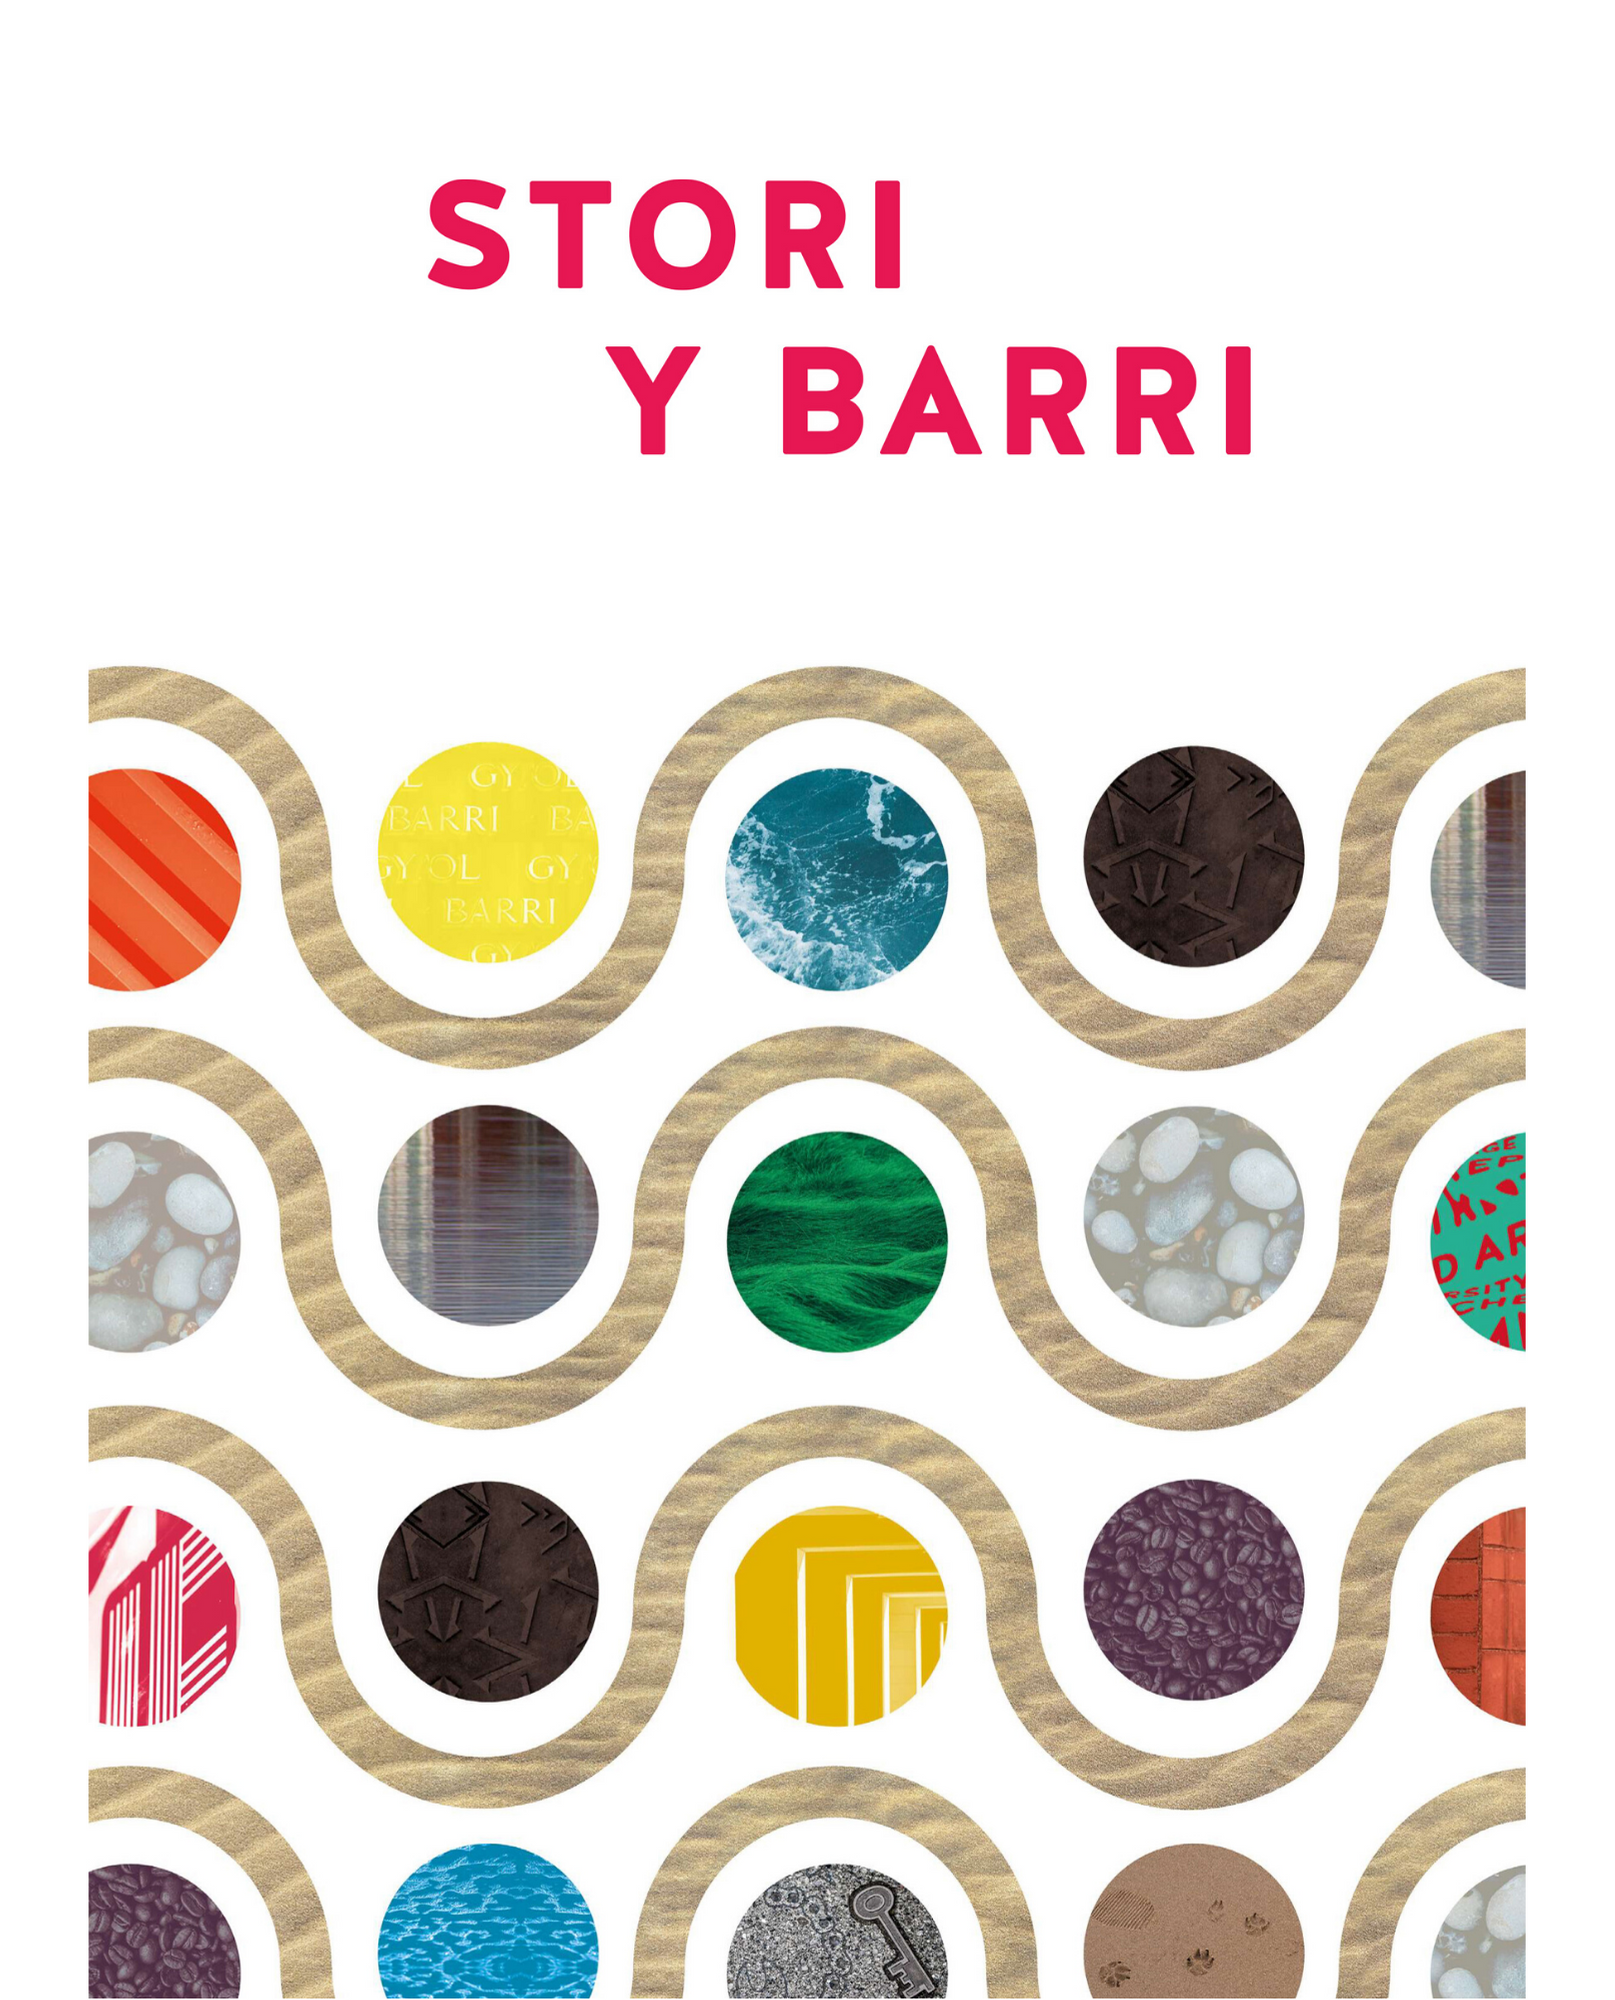 Barry Story front cover Welsh